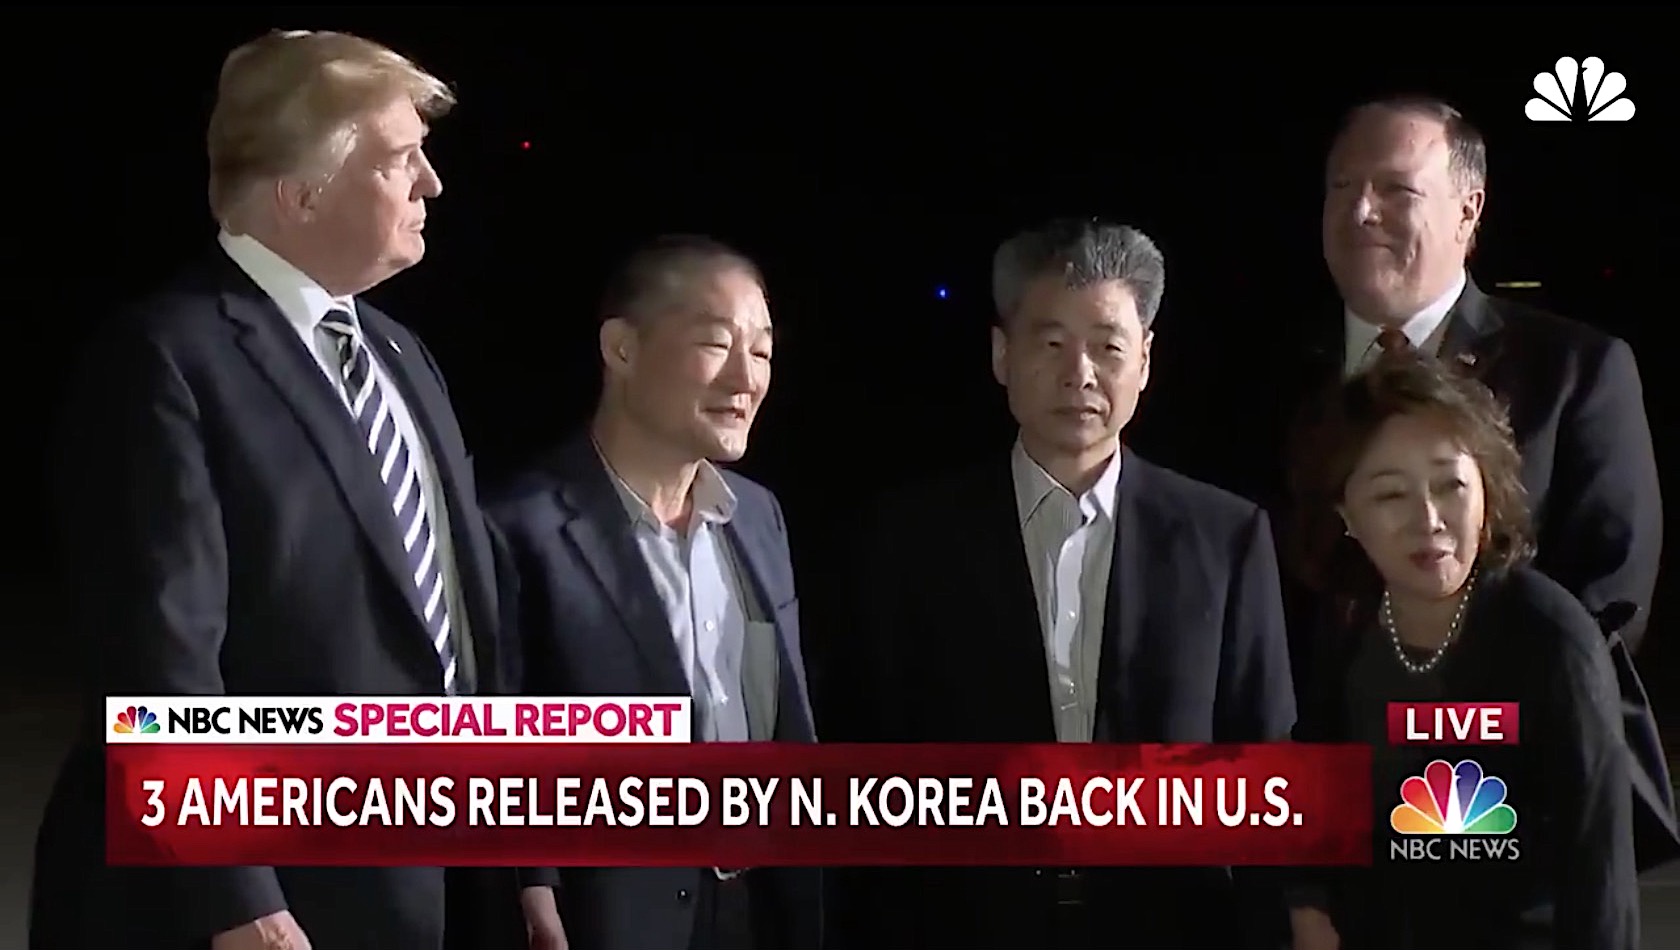 Trump greets Americans released by North Korea